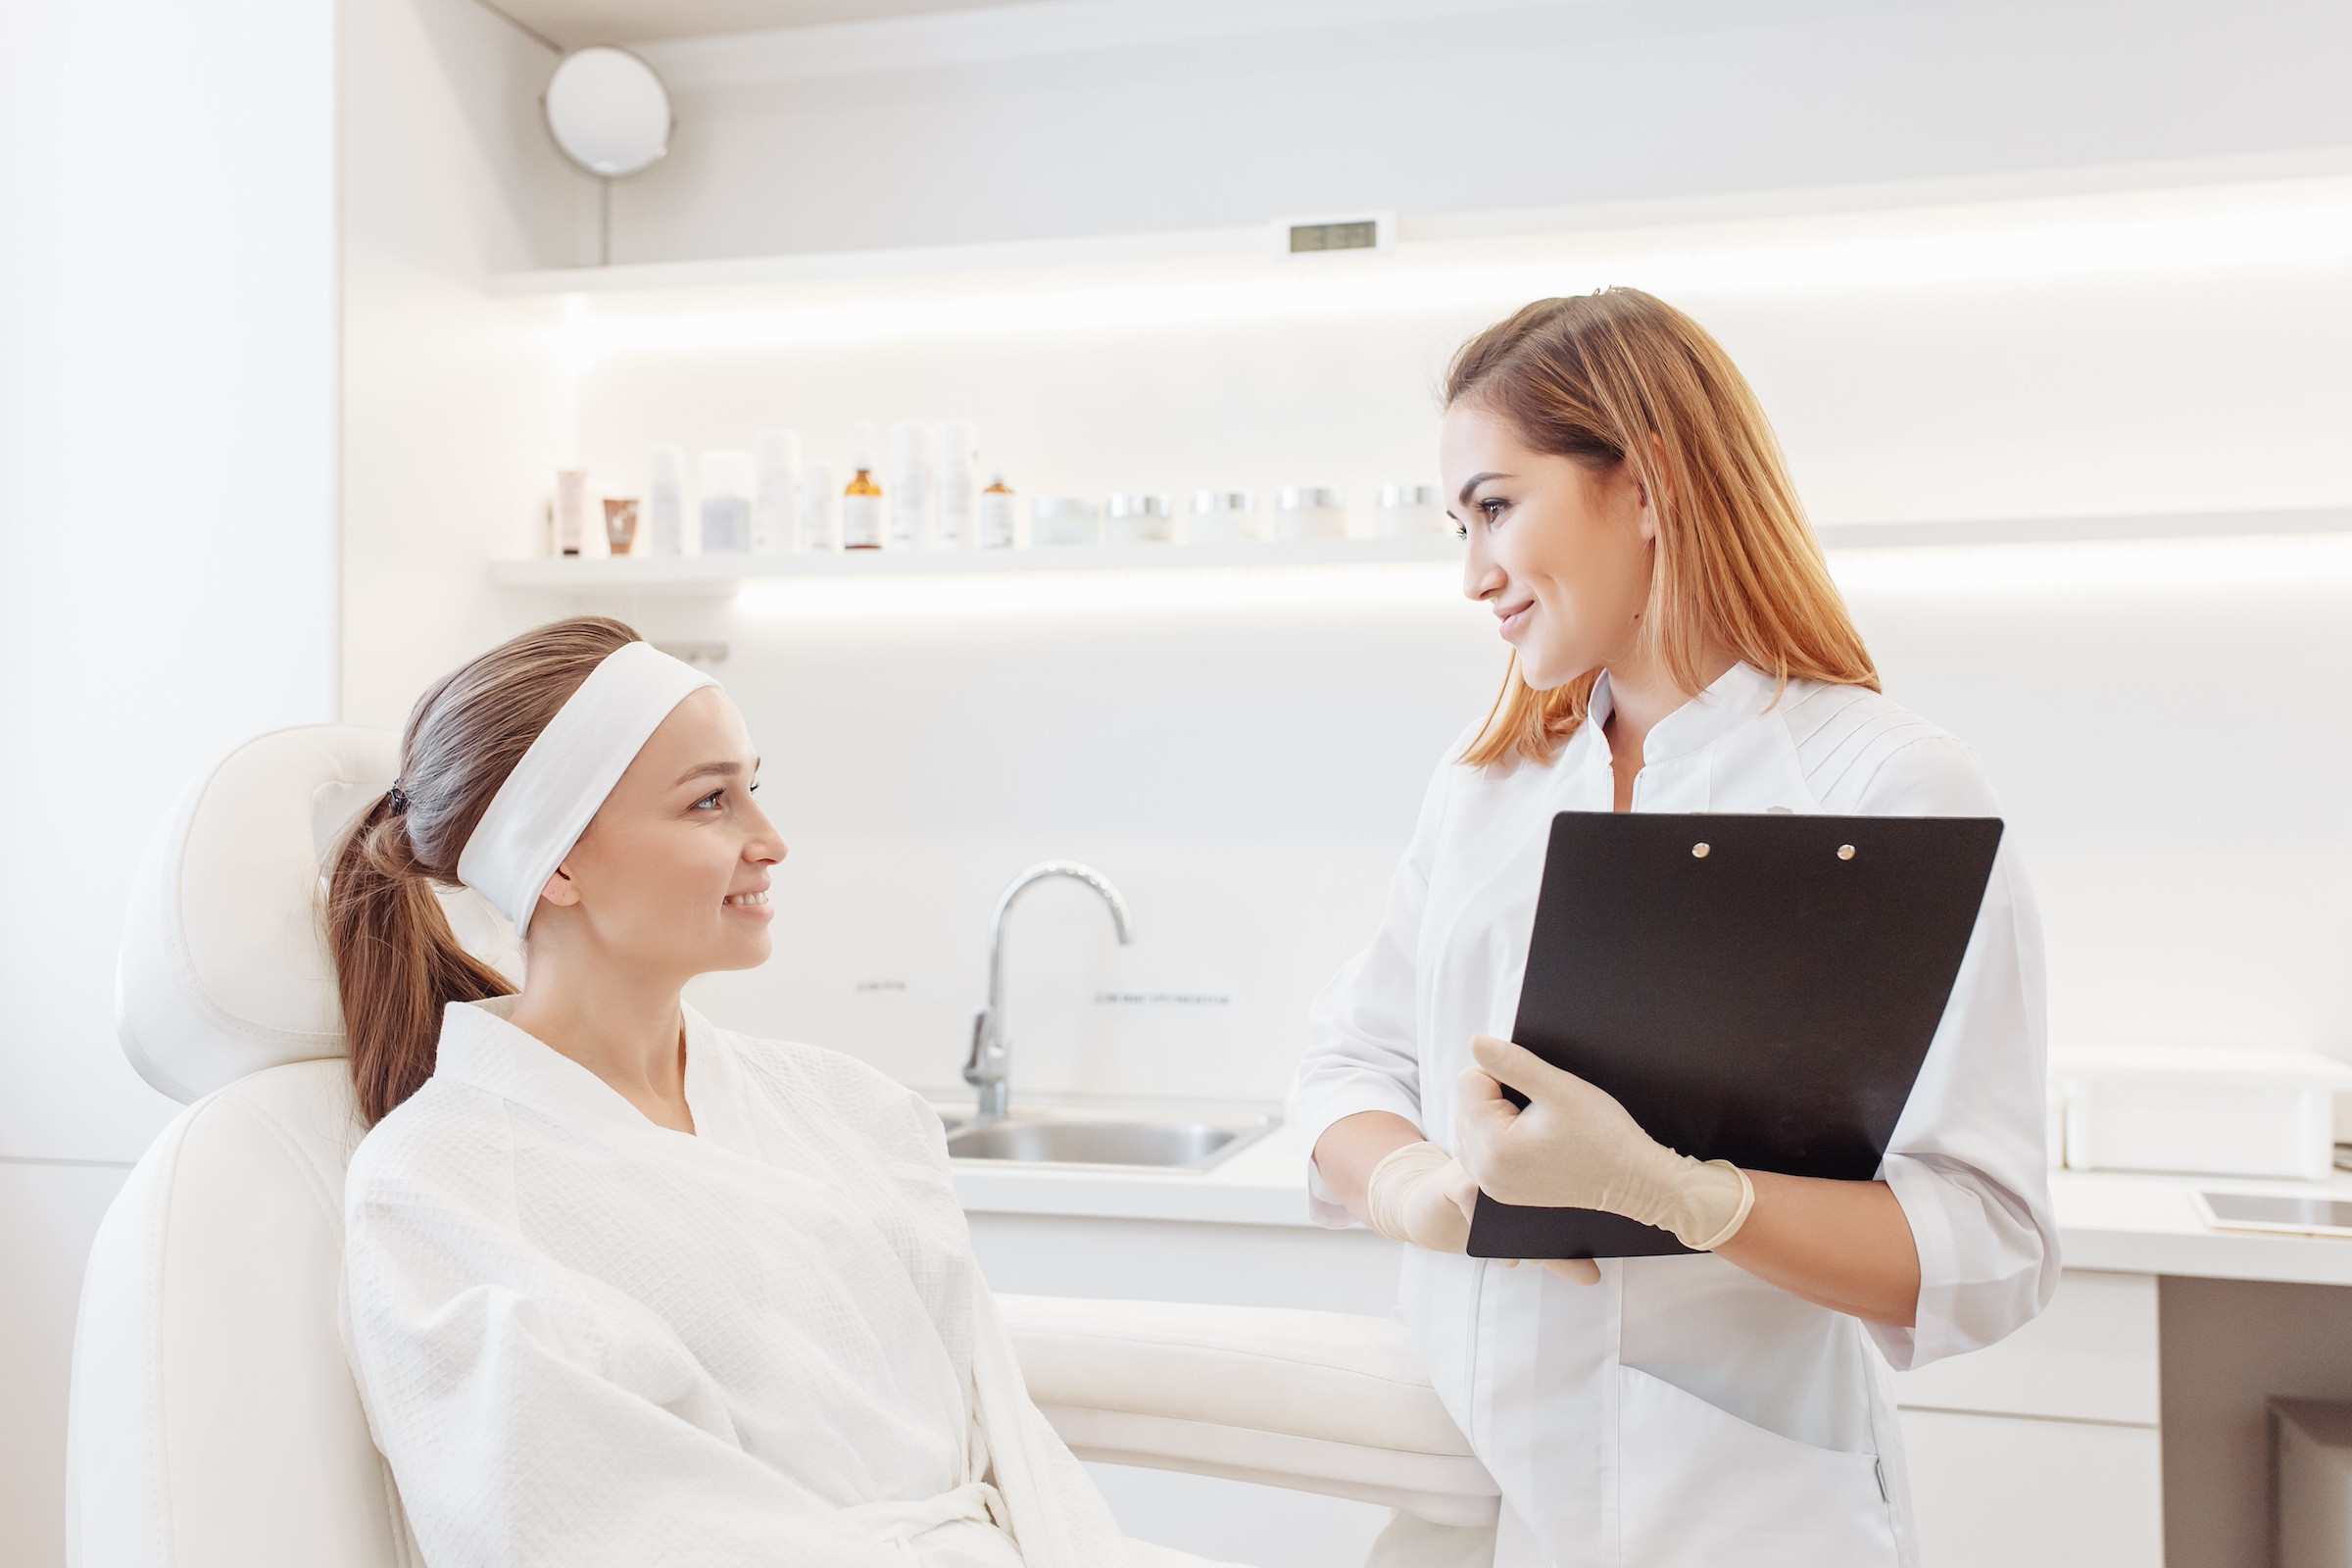 Own Your Look: 5 Incredible Benefits of Going to a Medical Spa